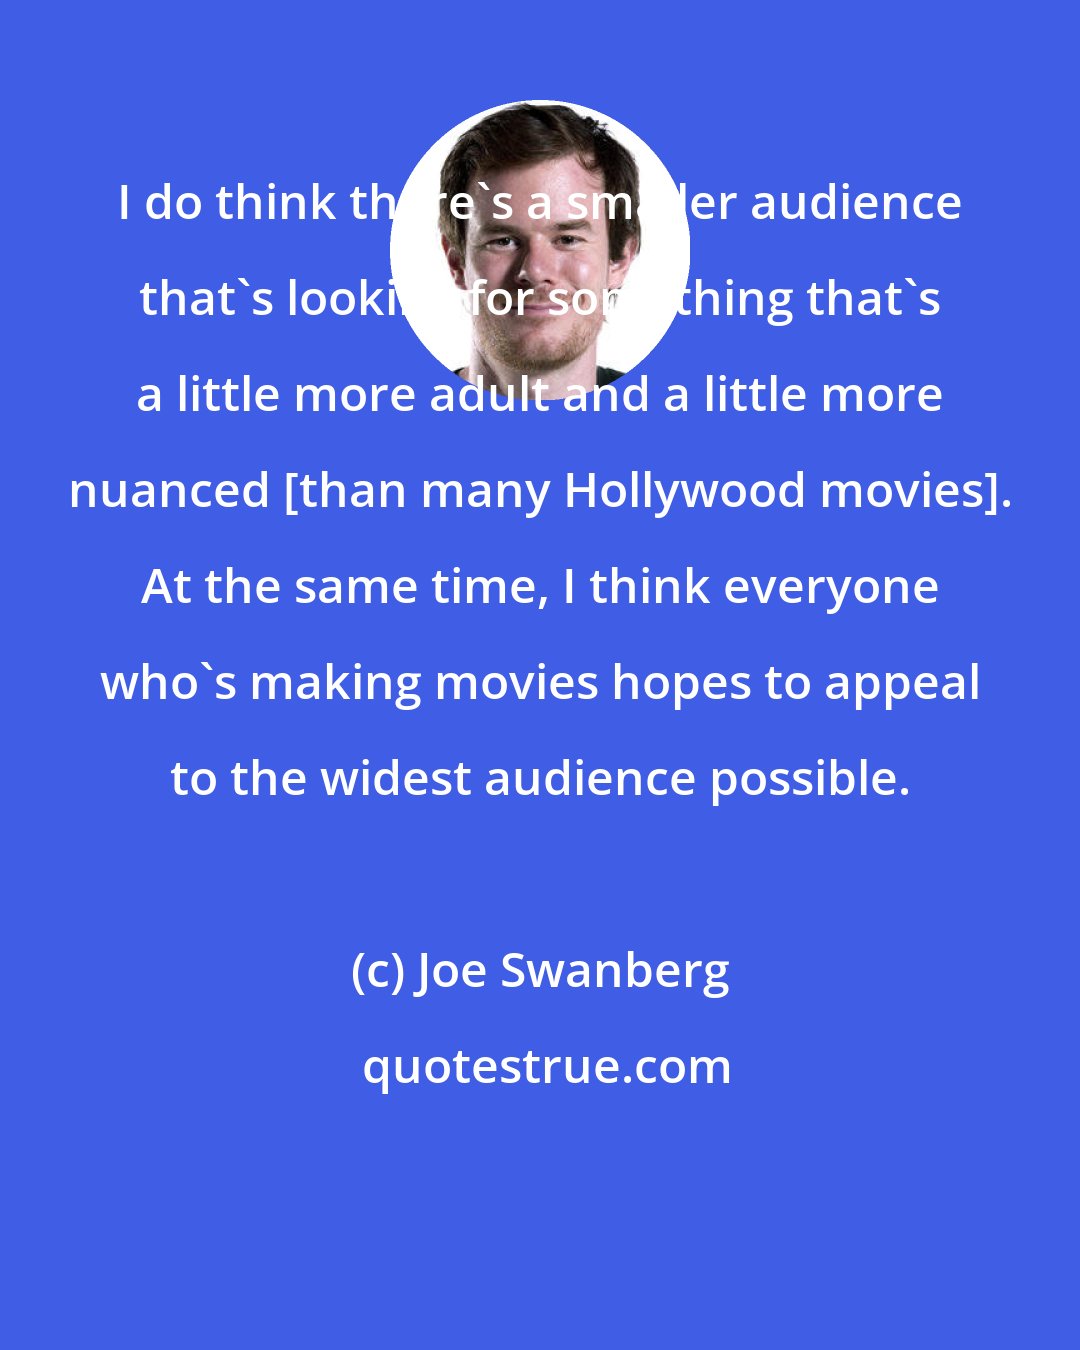 Joe Swanberg: I do think there's a smaller audience that's looking for something that's a little more adult and a little more nuanced [than many Hollywood movies]. At the same time, I think everyone who's making movies hopes to appeal to the widest audience possible.